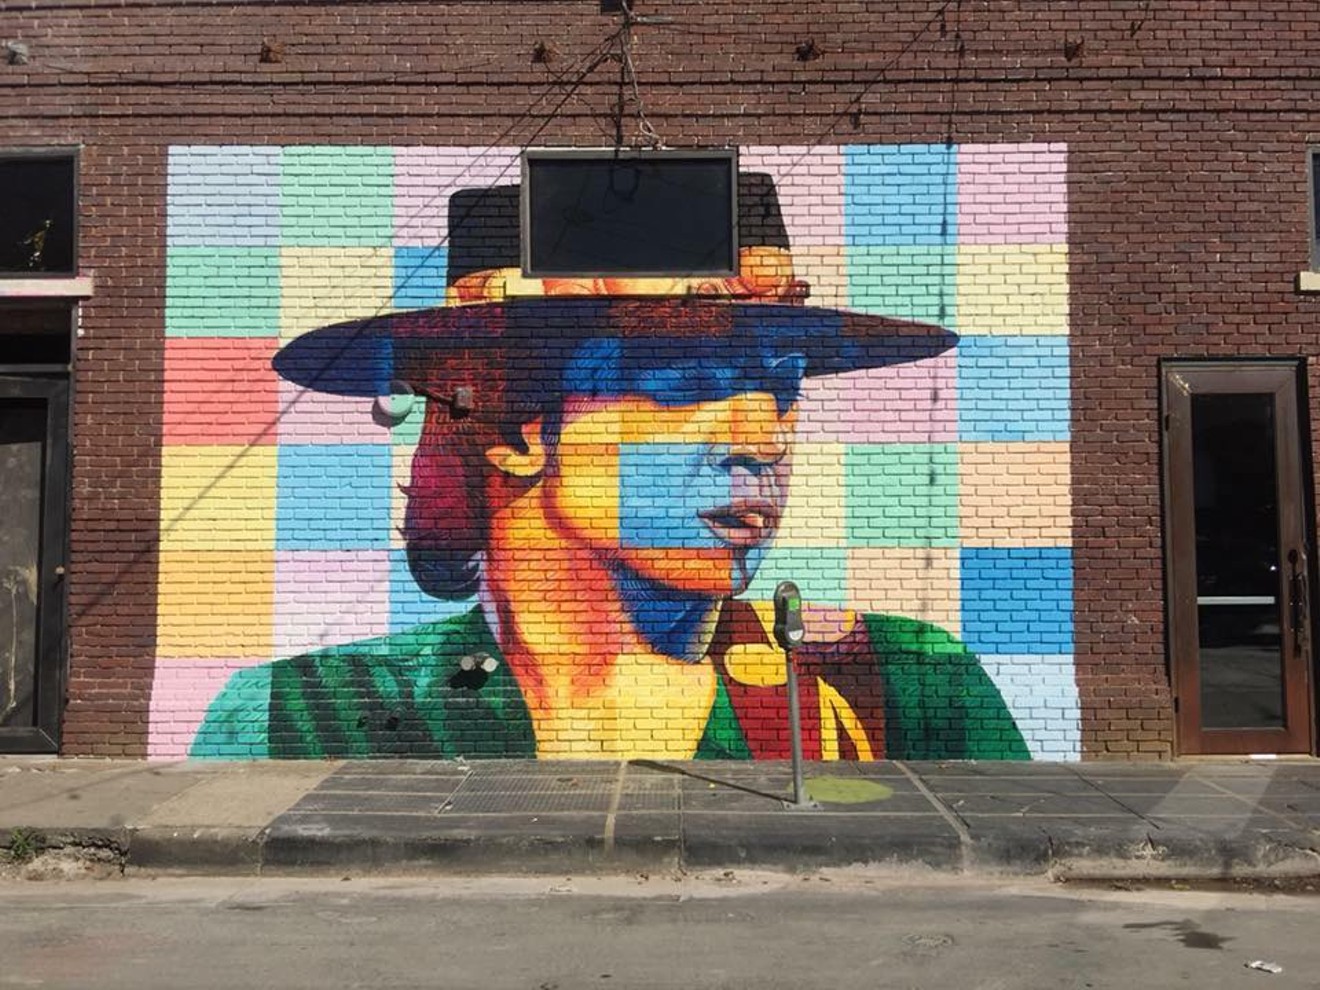 "Stevie Ray Ellum" is at Crowdus and Main streets in Deep Ellum.